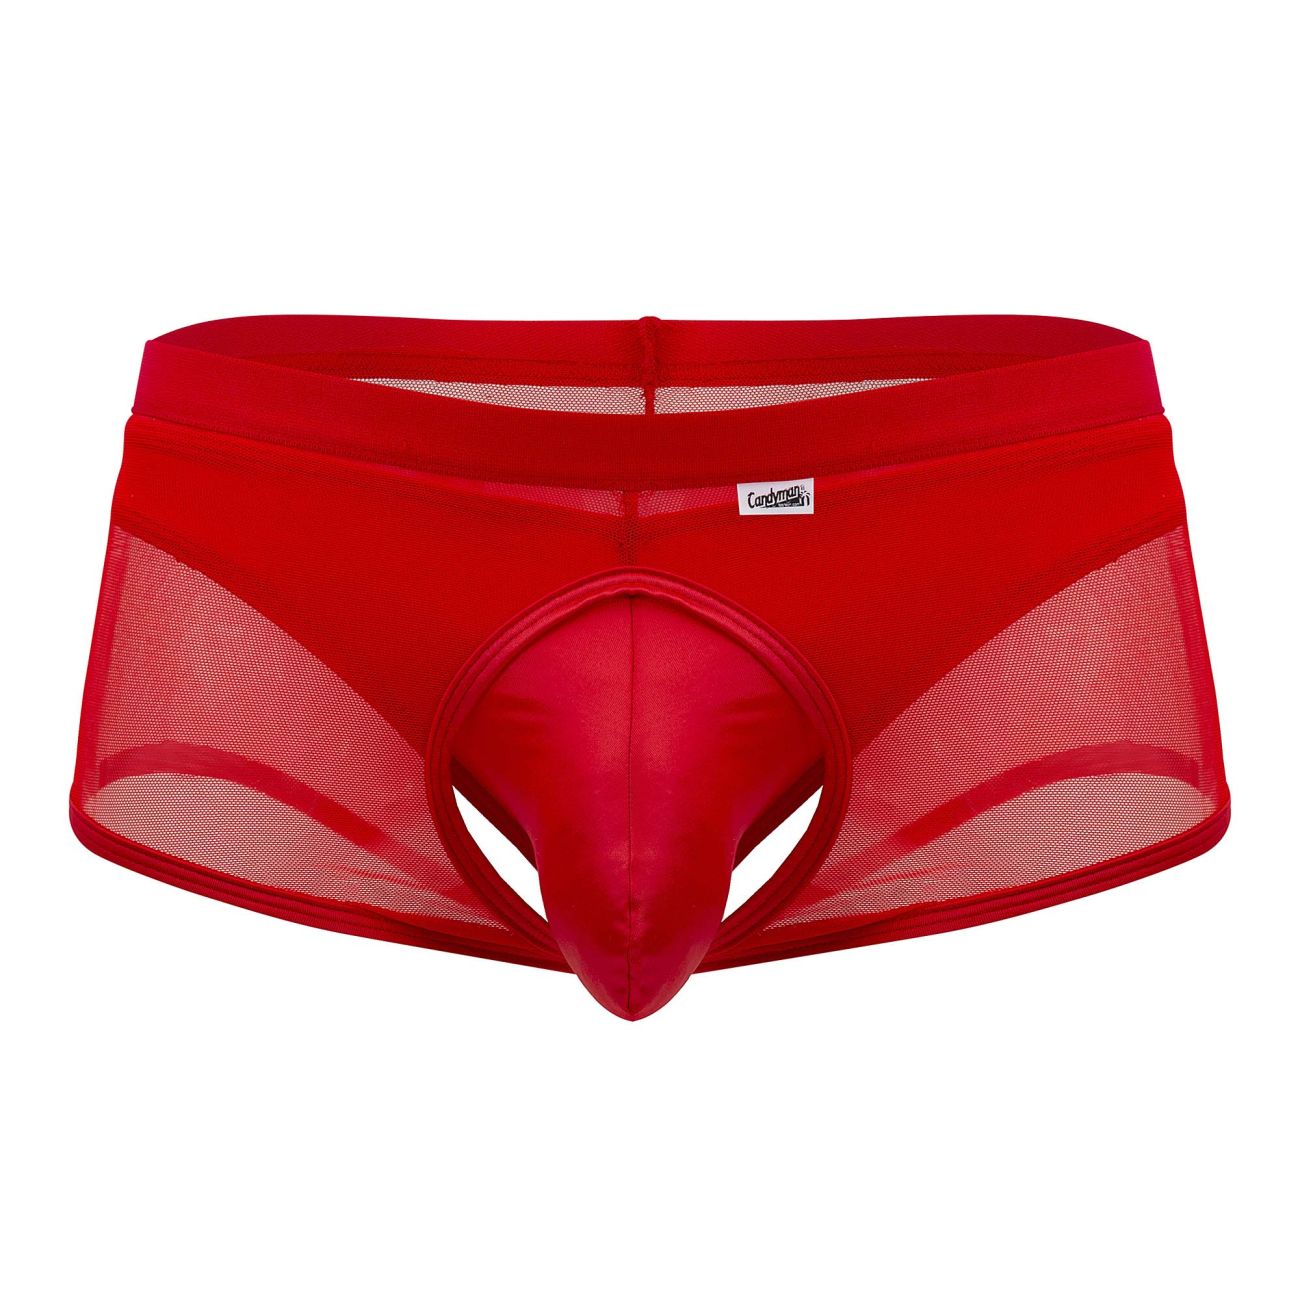 CandyMan 99629 Trunk and Thong Set Red